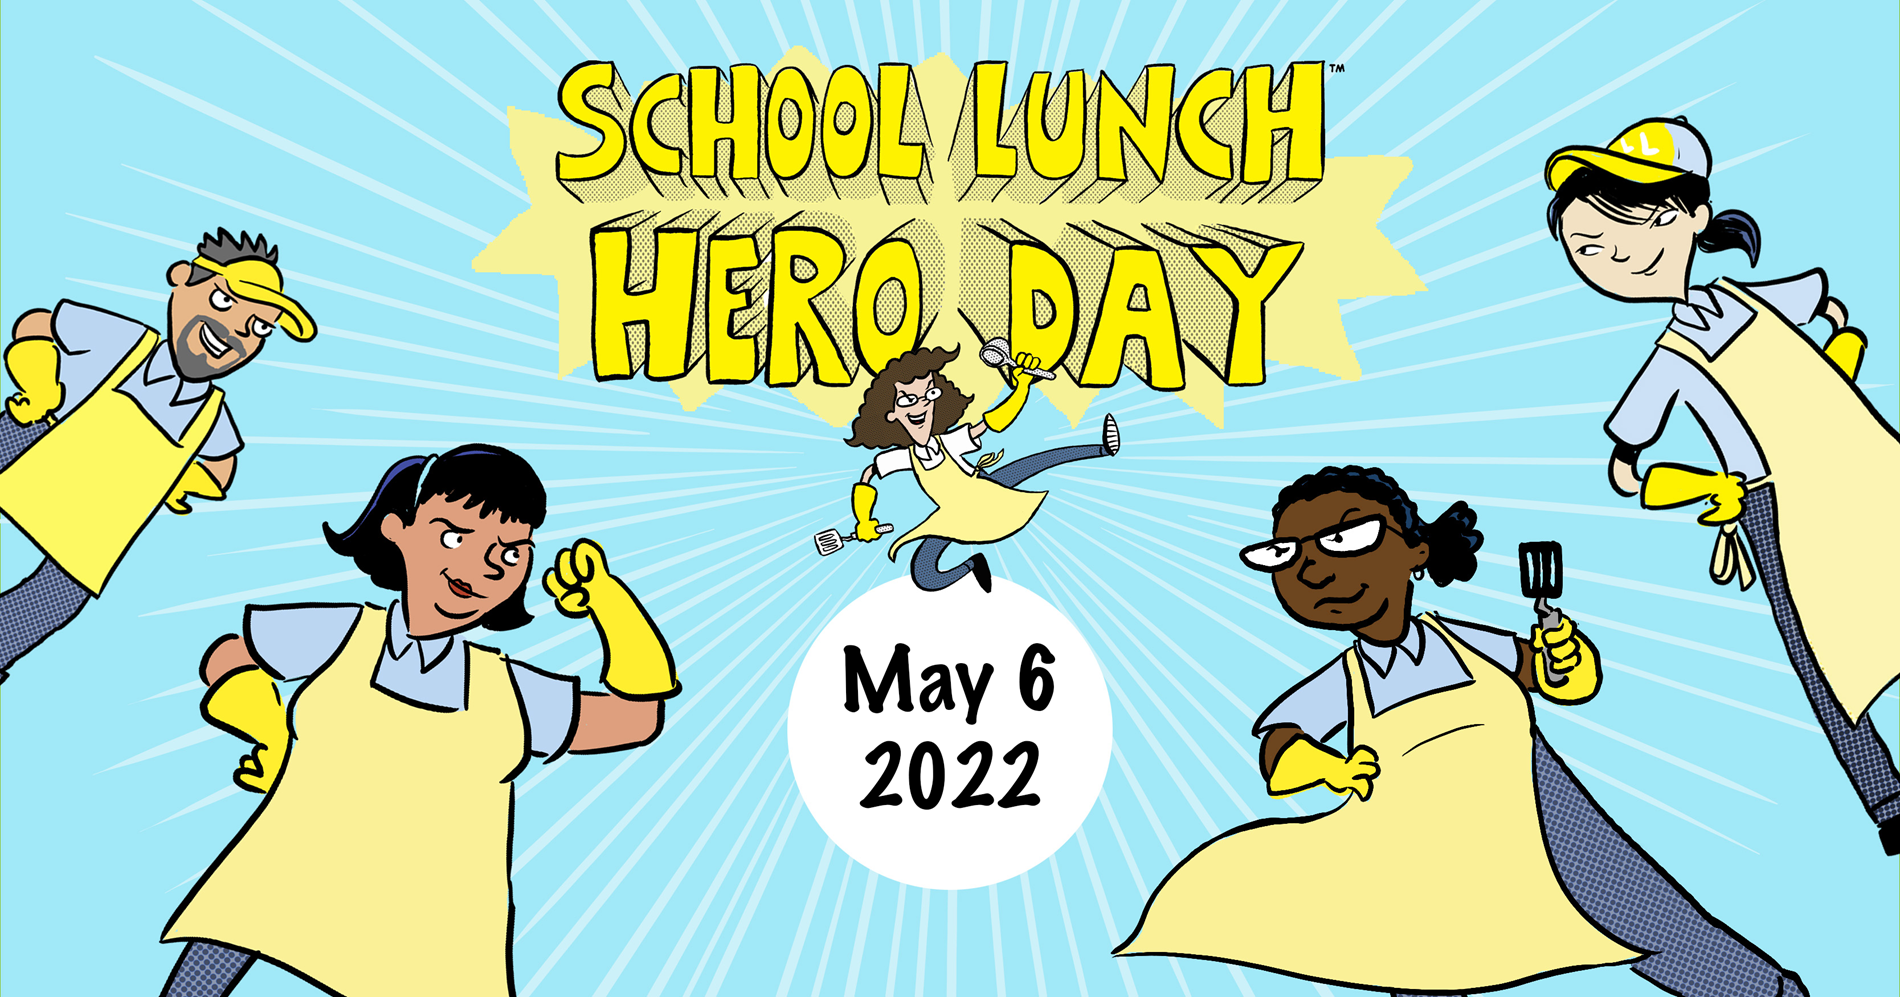 School Lunch Hero Day - May 6th 2022